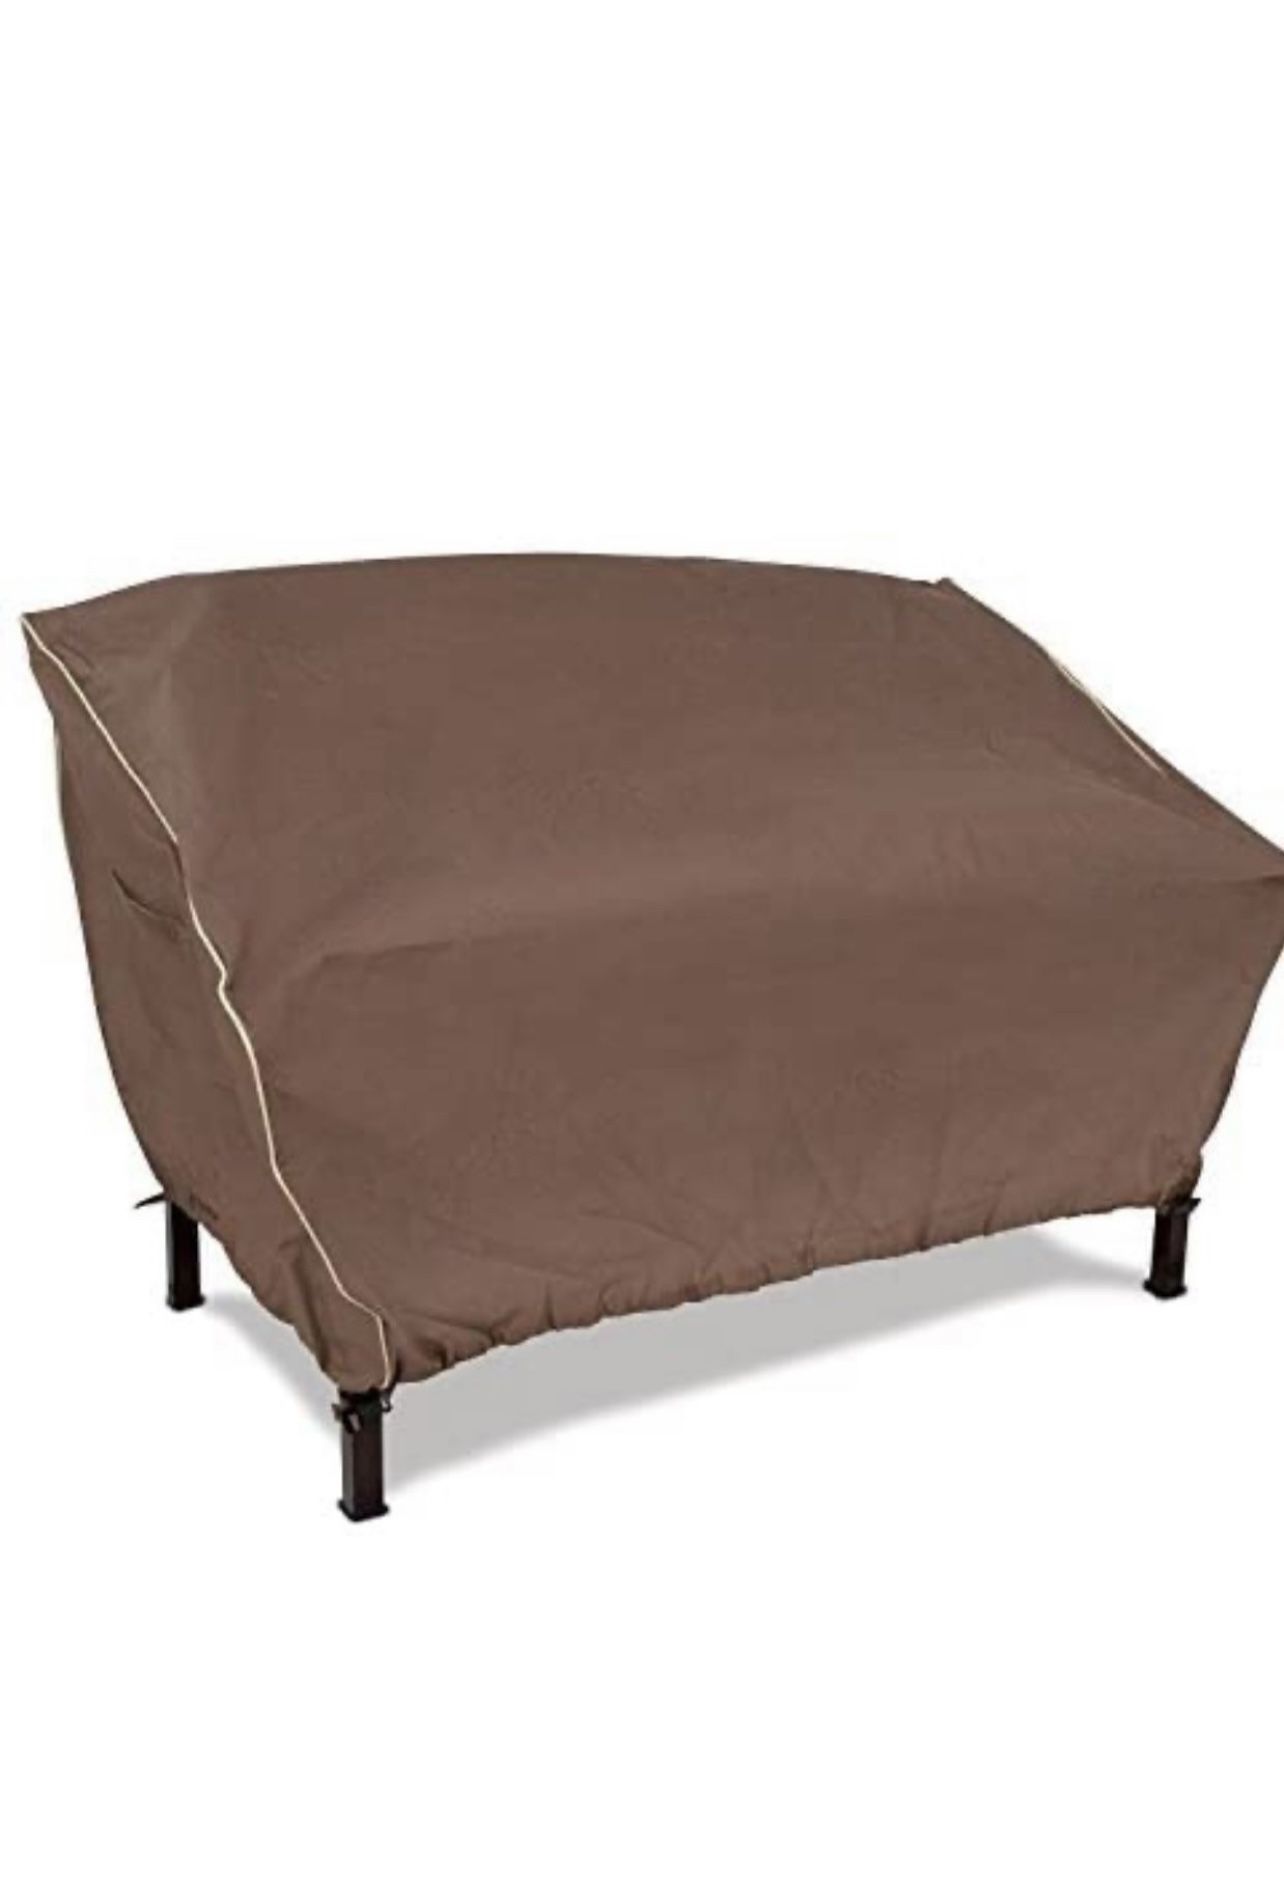 Armor All  Loveseat Cover 60” x 35” x 32”  Home (Brown)